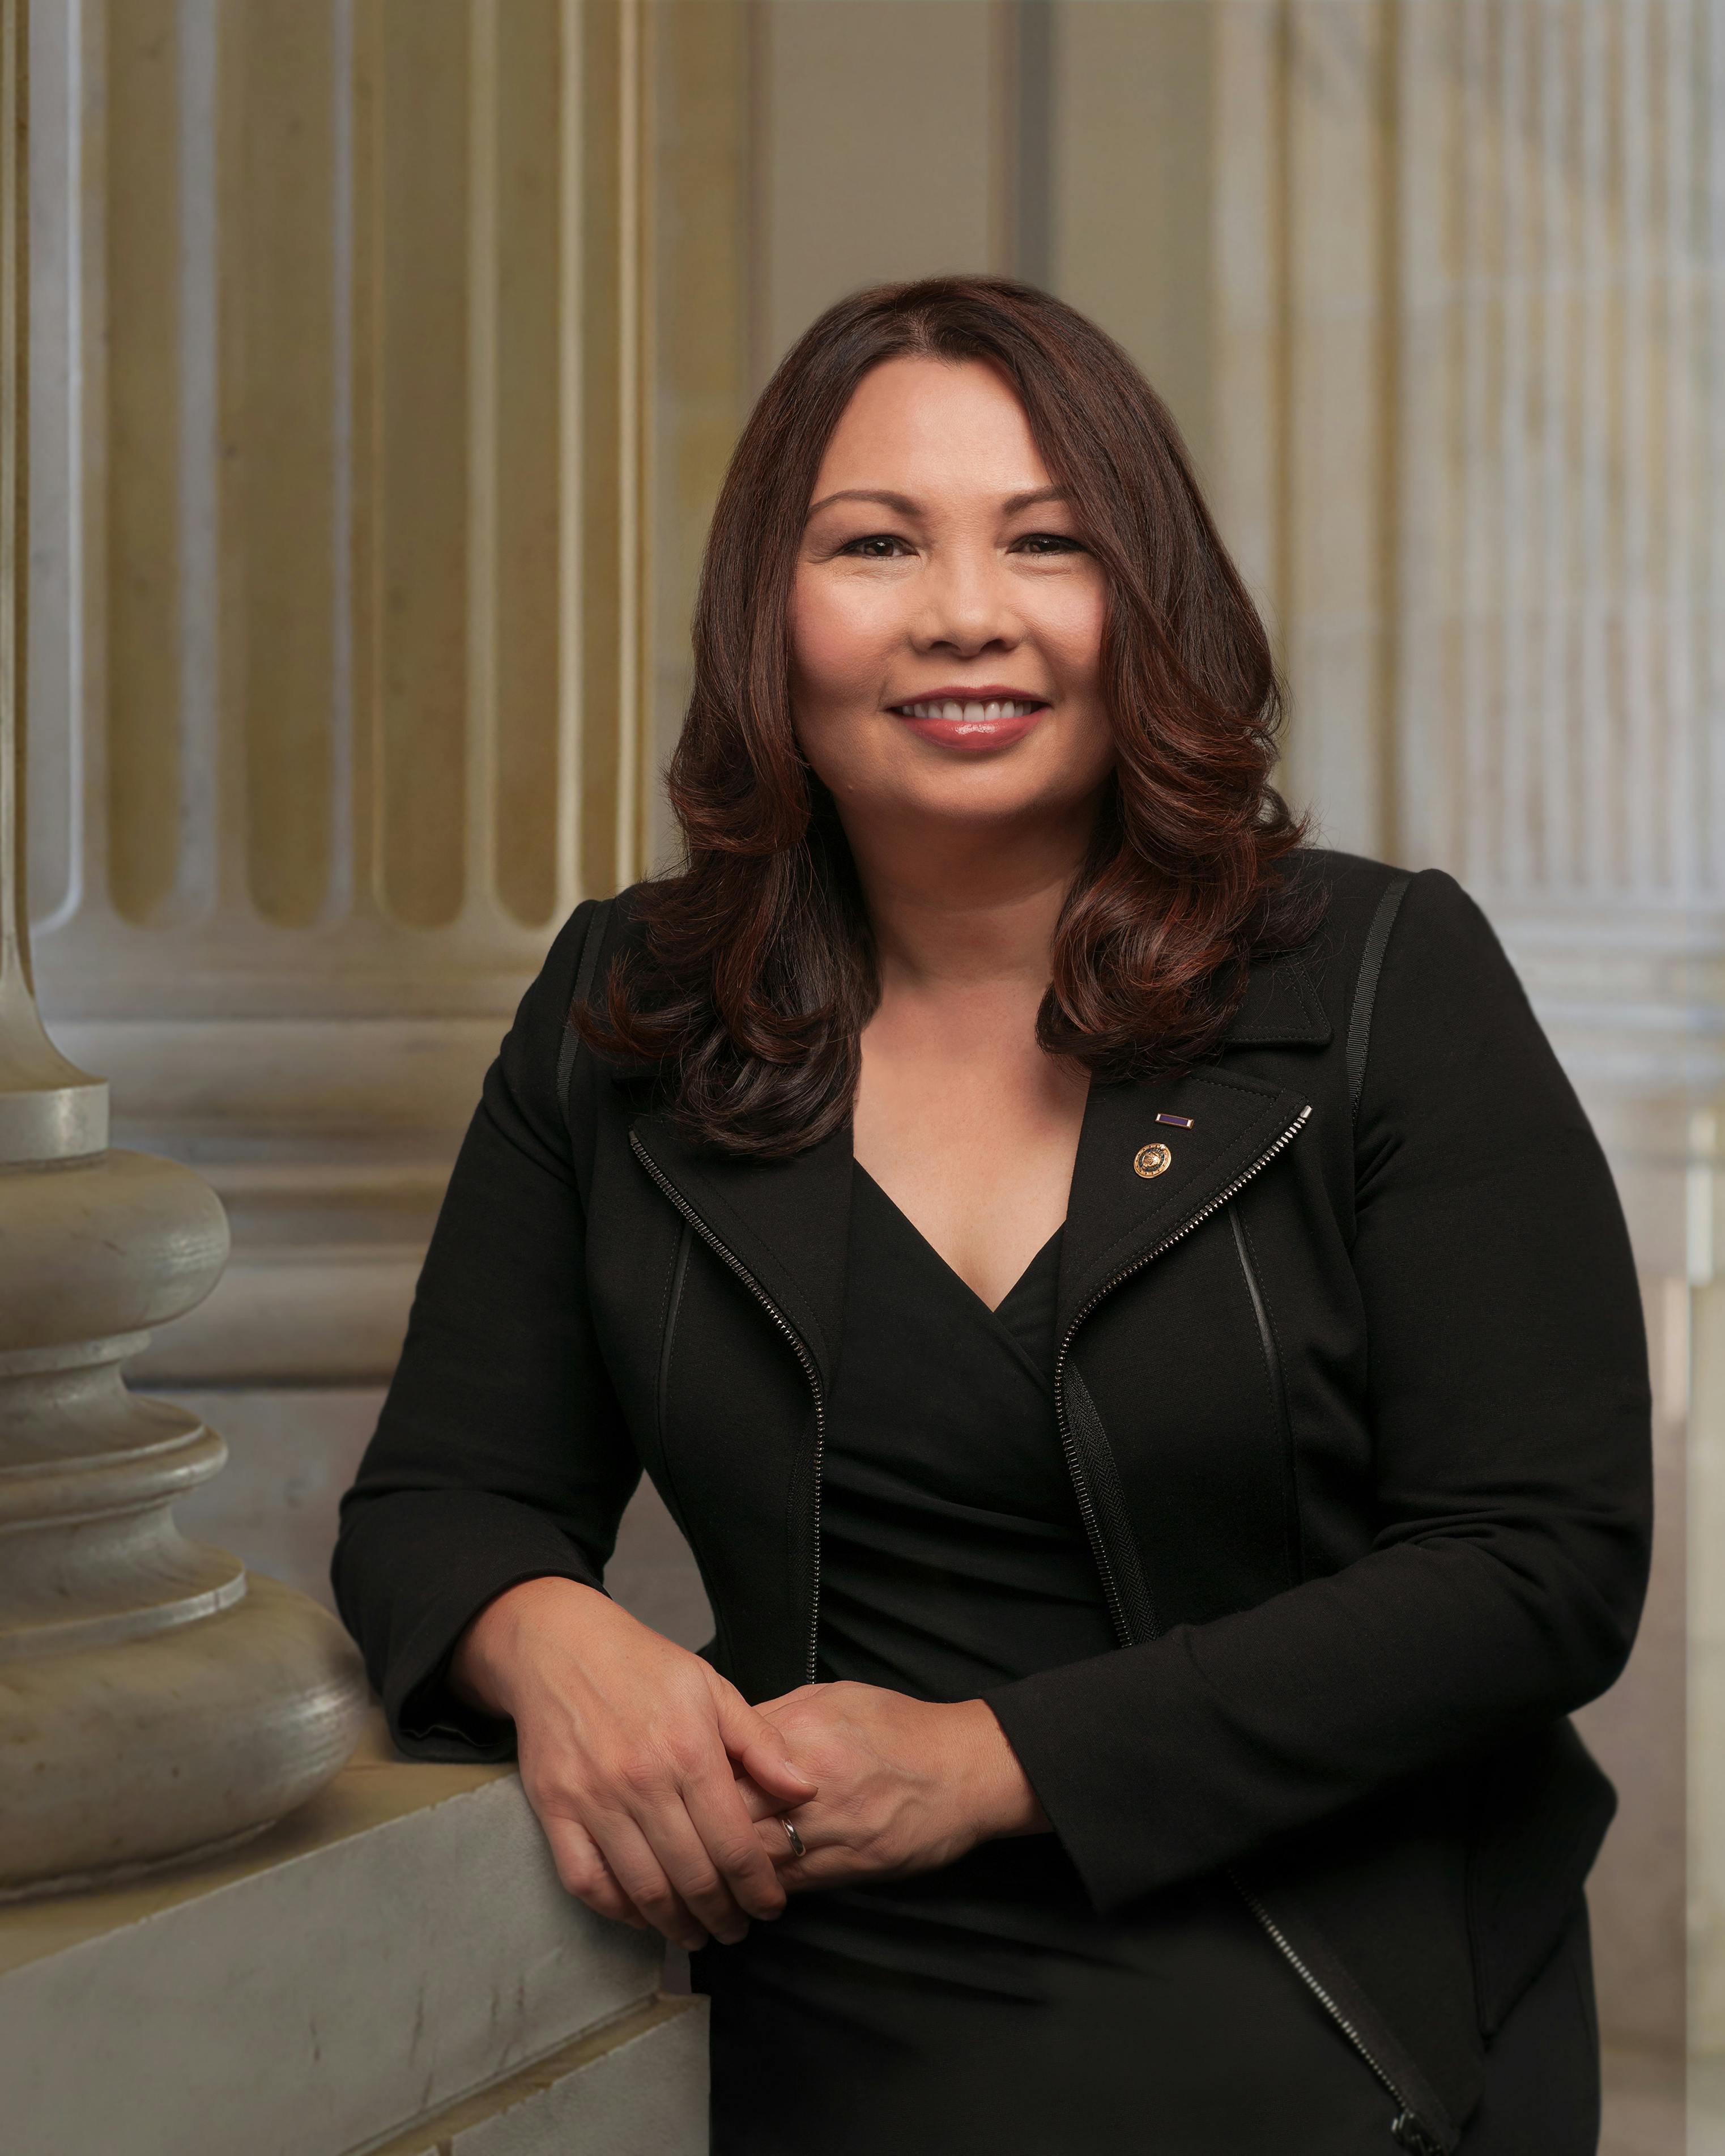 Profile picture of Tammy Duckworth